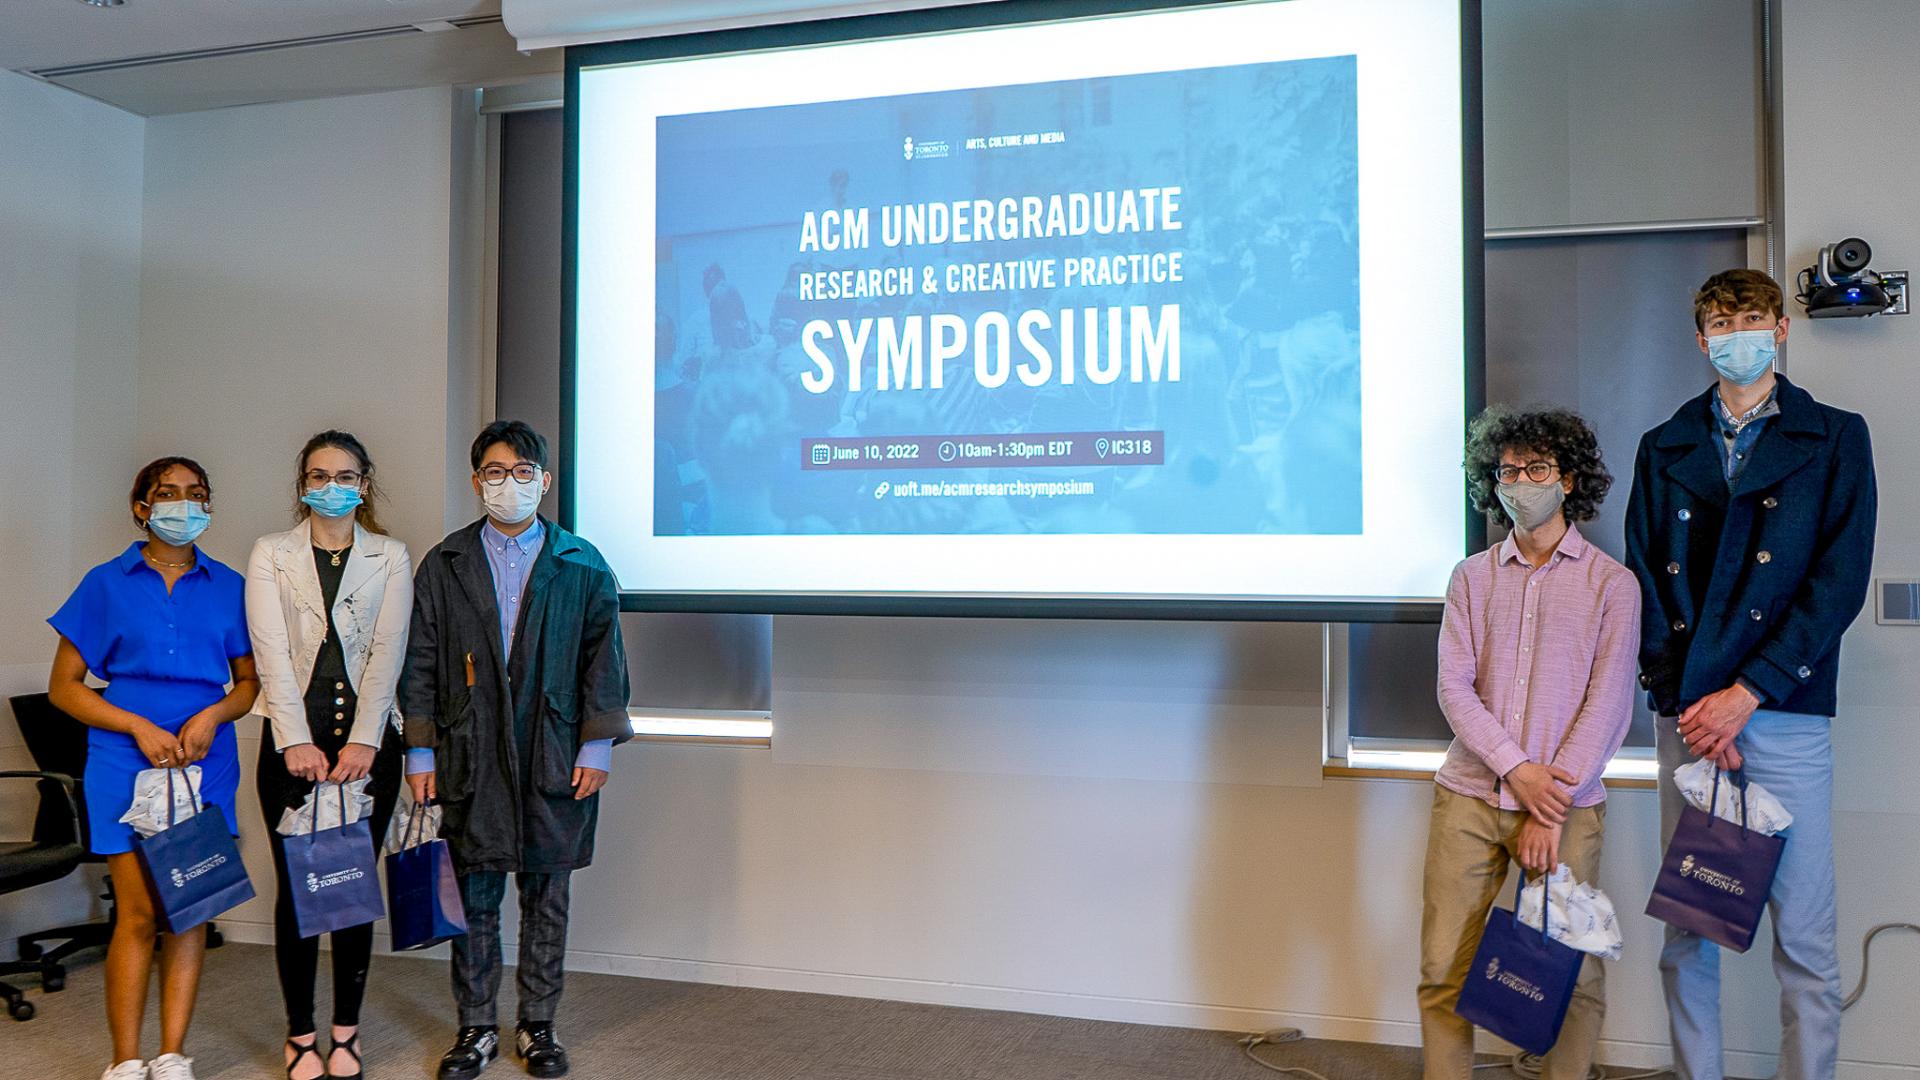 Group photo of ACM student presenters standing in front of the projector with the banner of the Symposium